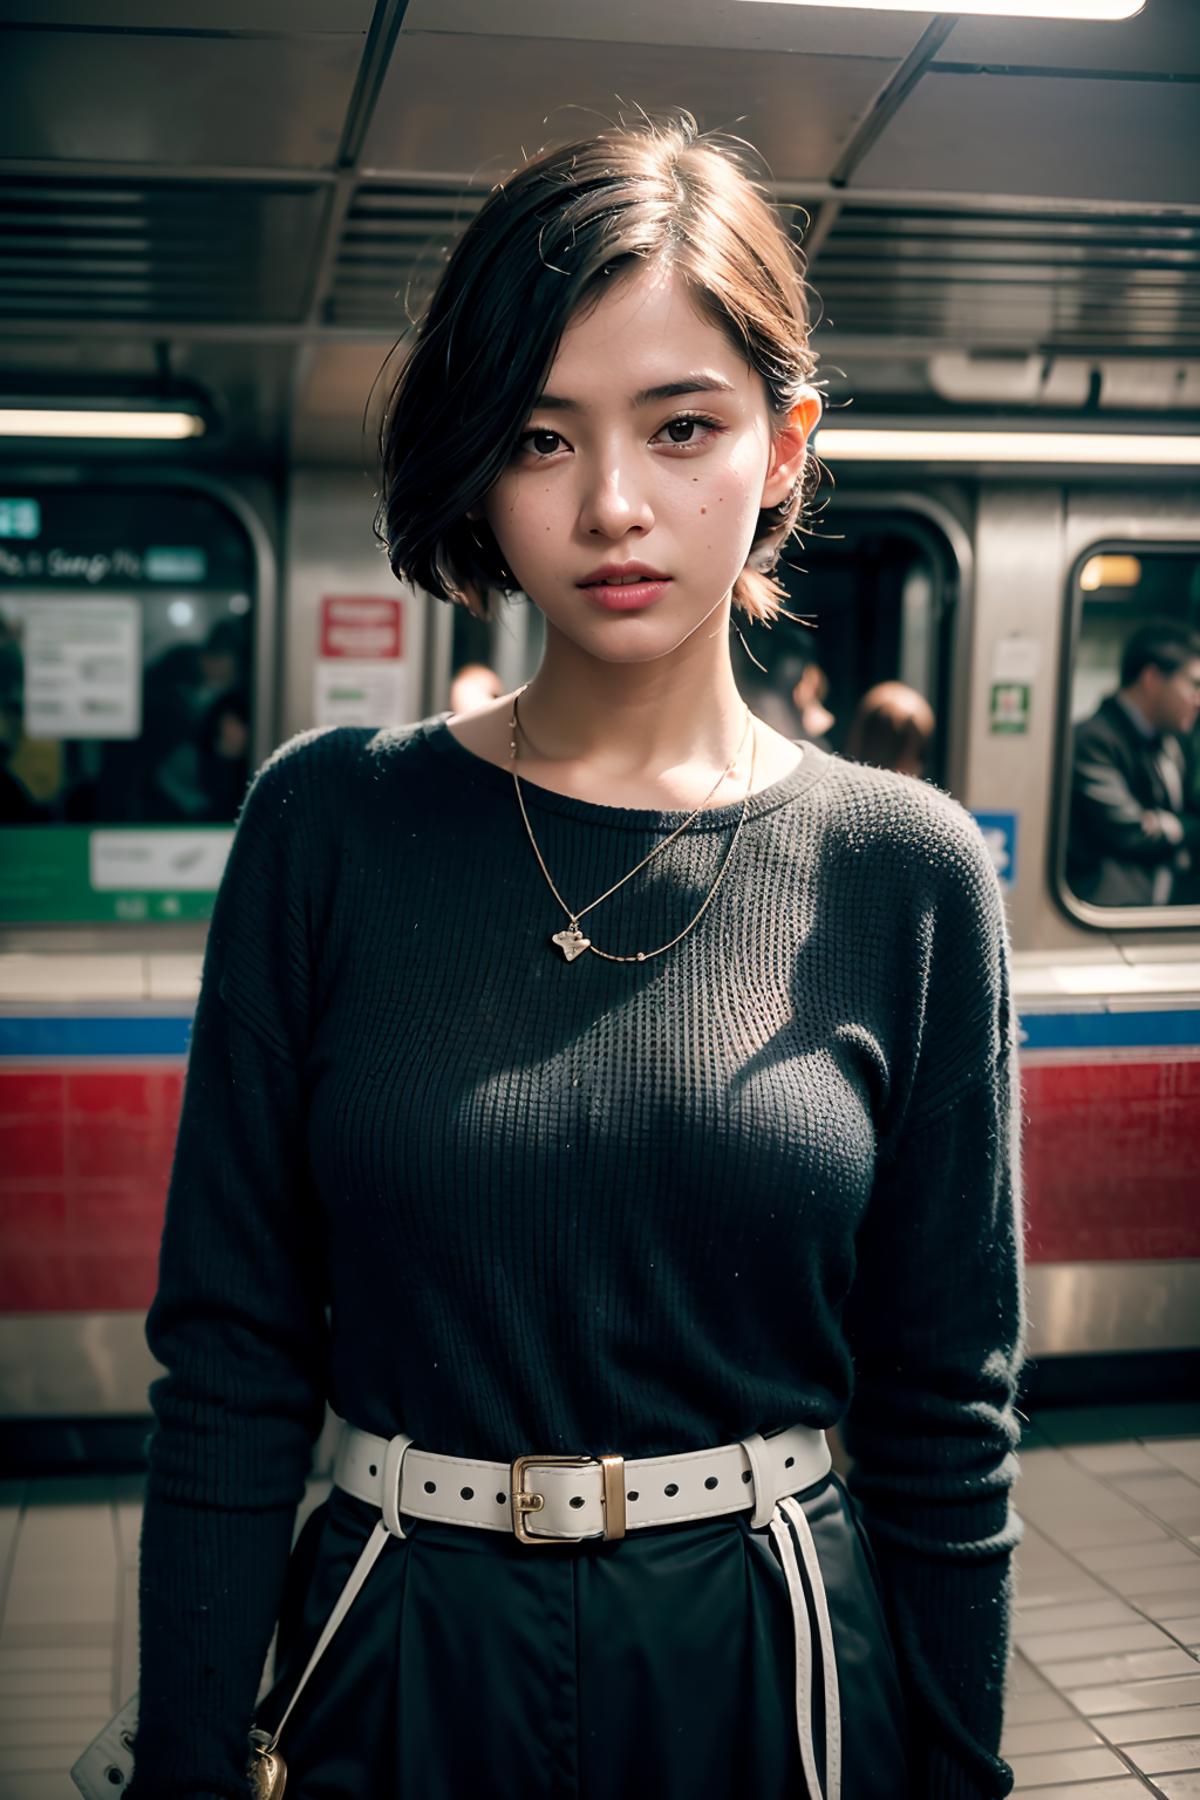 A woman with short hair, a nose ring, and a gold chain necklace standing on a subway train.